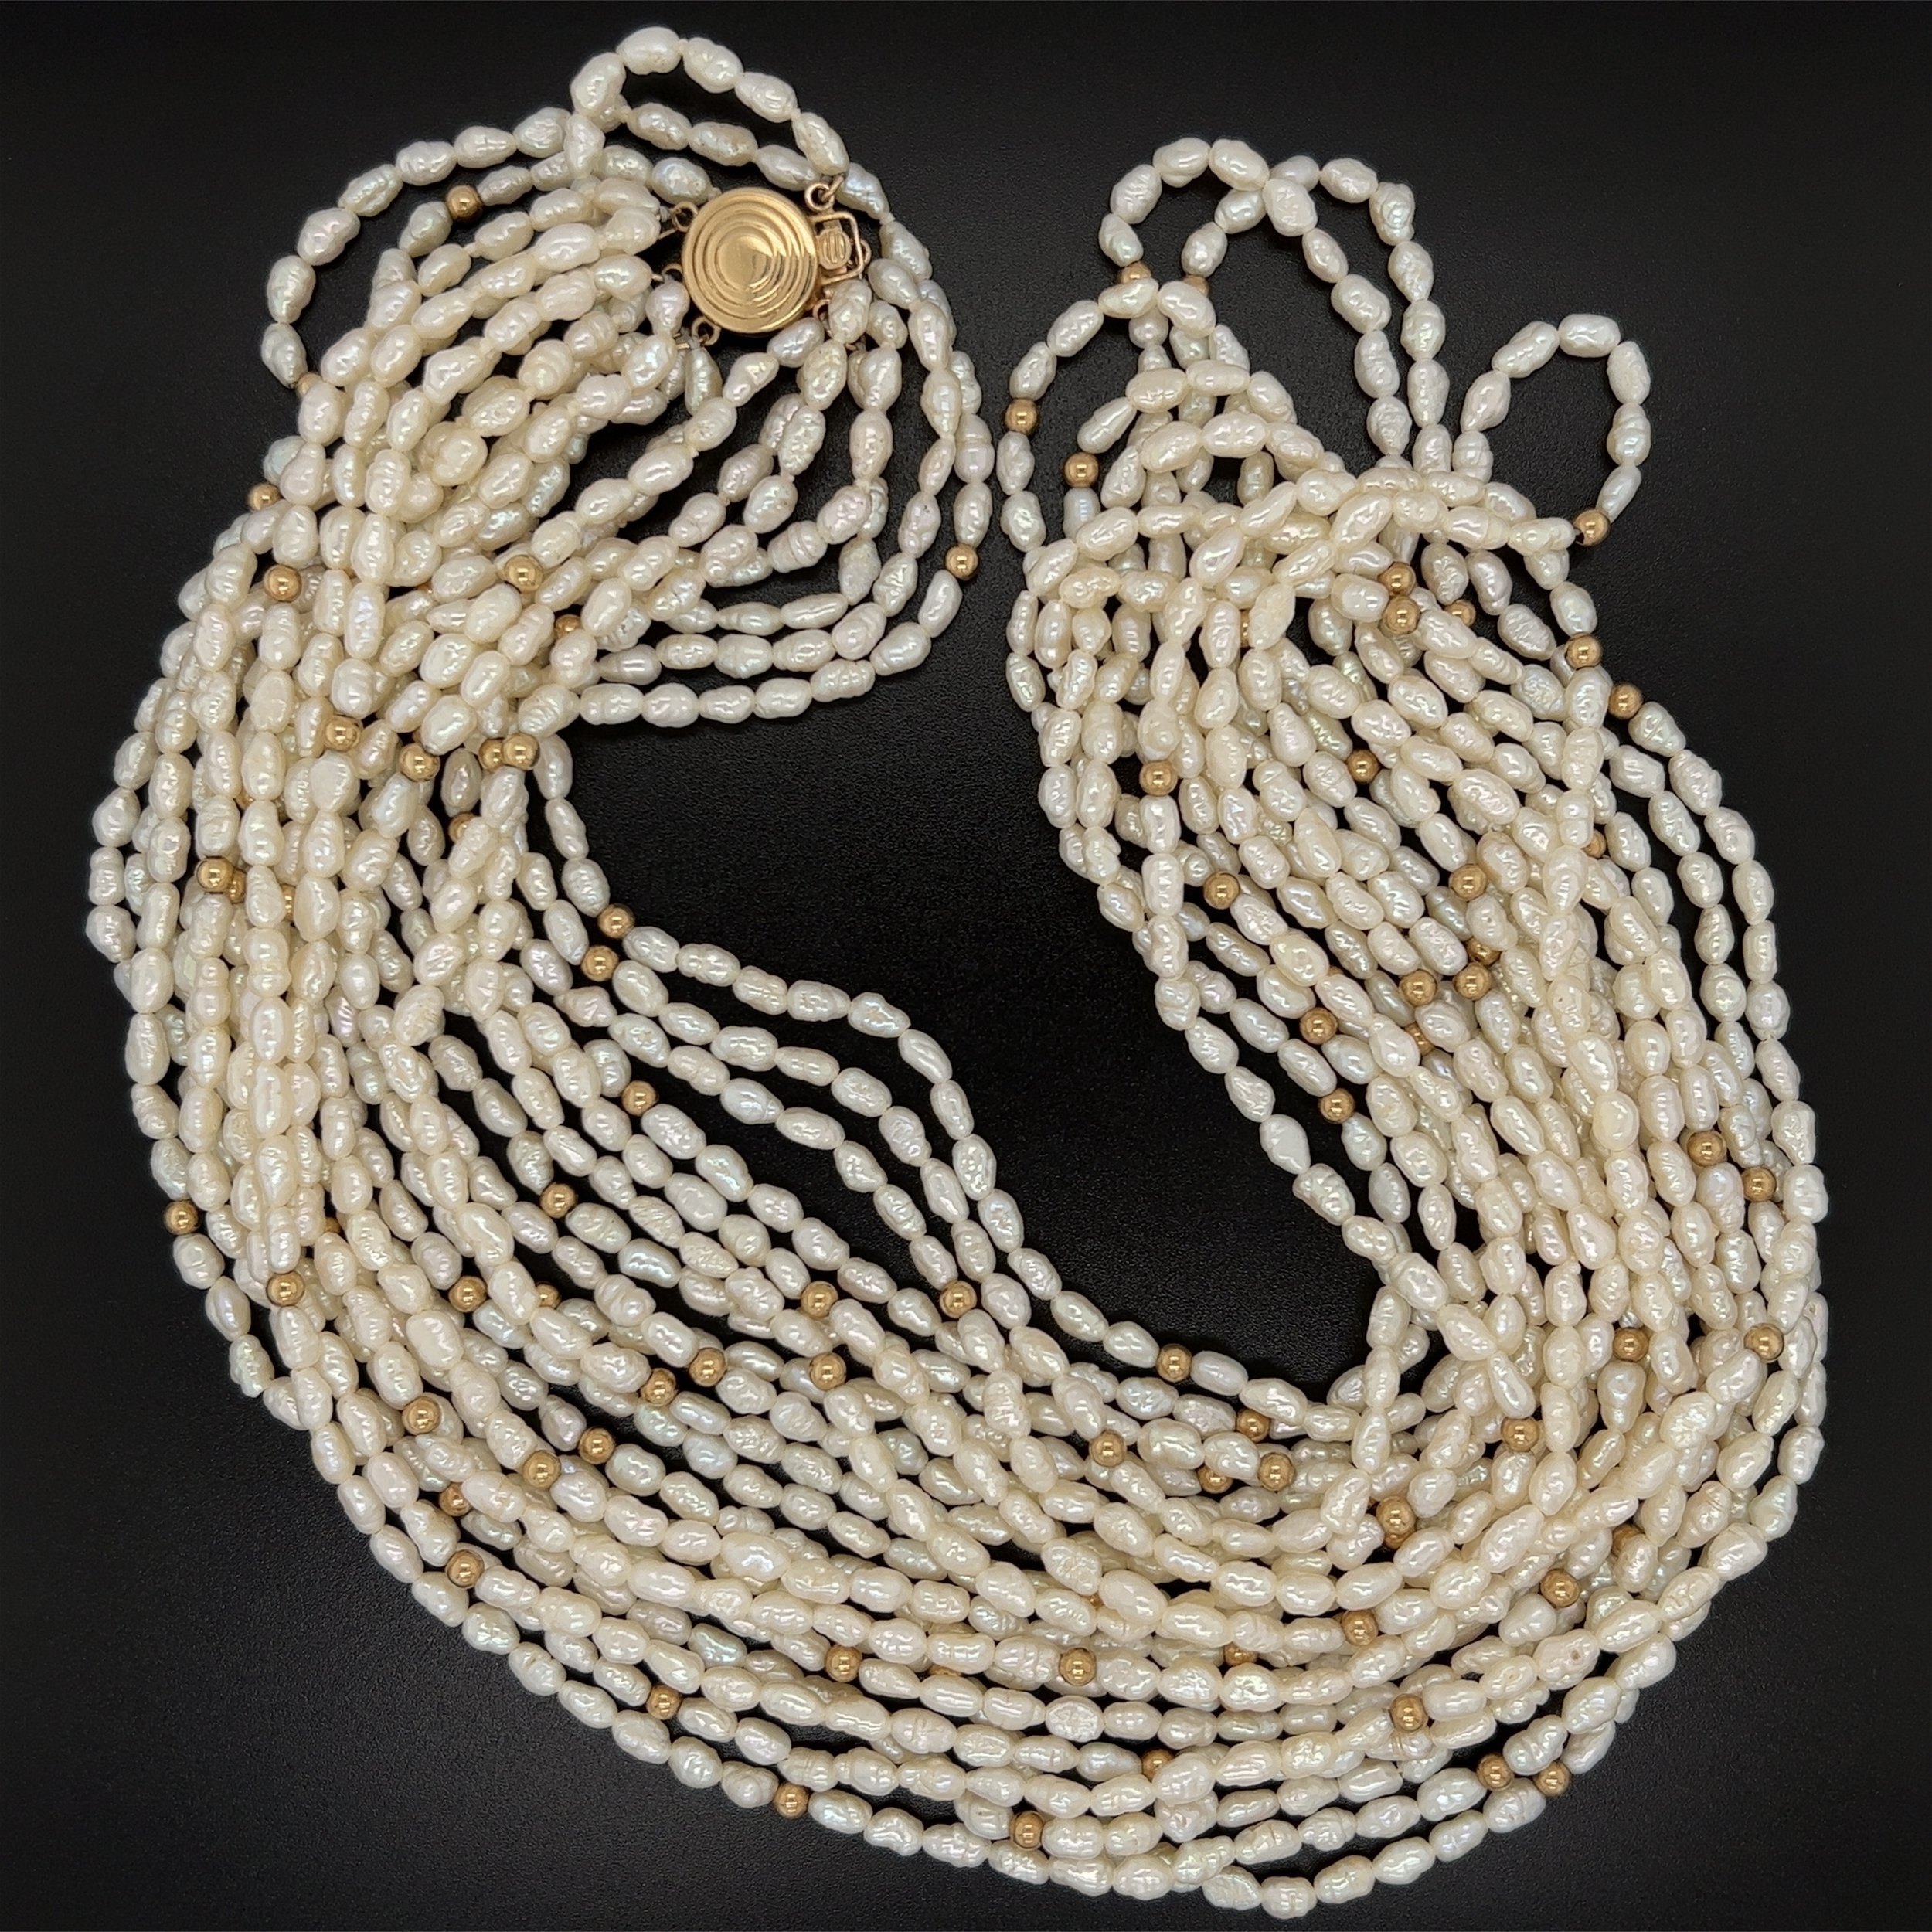 14K YG 10 Strand Baroque Pearl & Gold Bead Necklace 83.4g, 23"